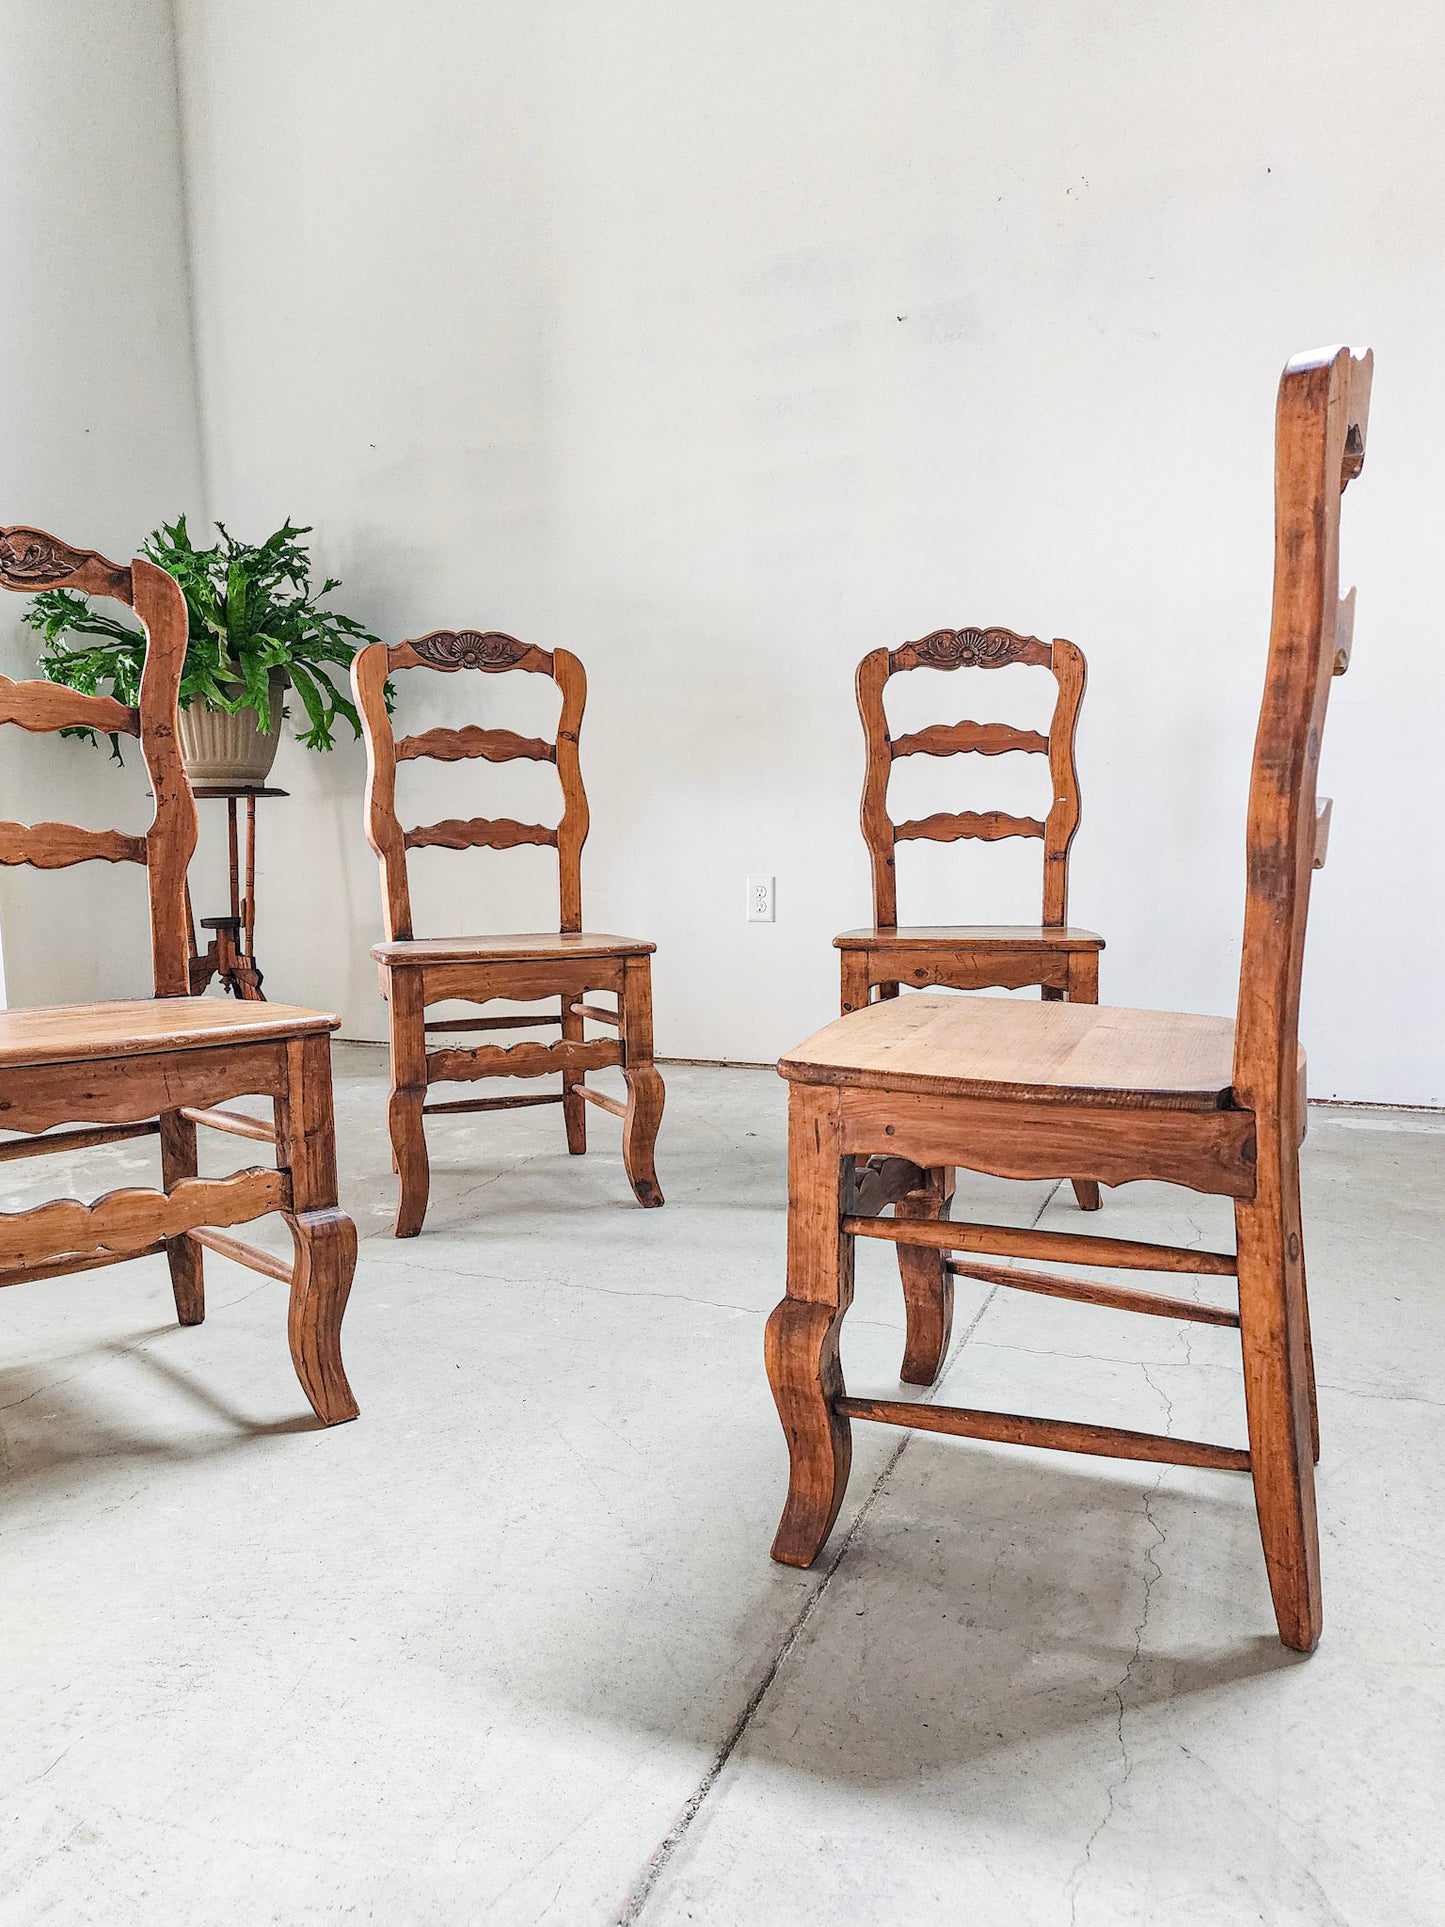 Antique English Pine Dining Chair - Reclaimed Mt. Goods